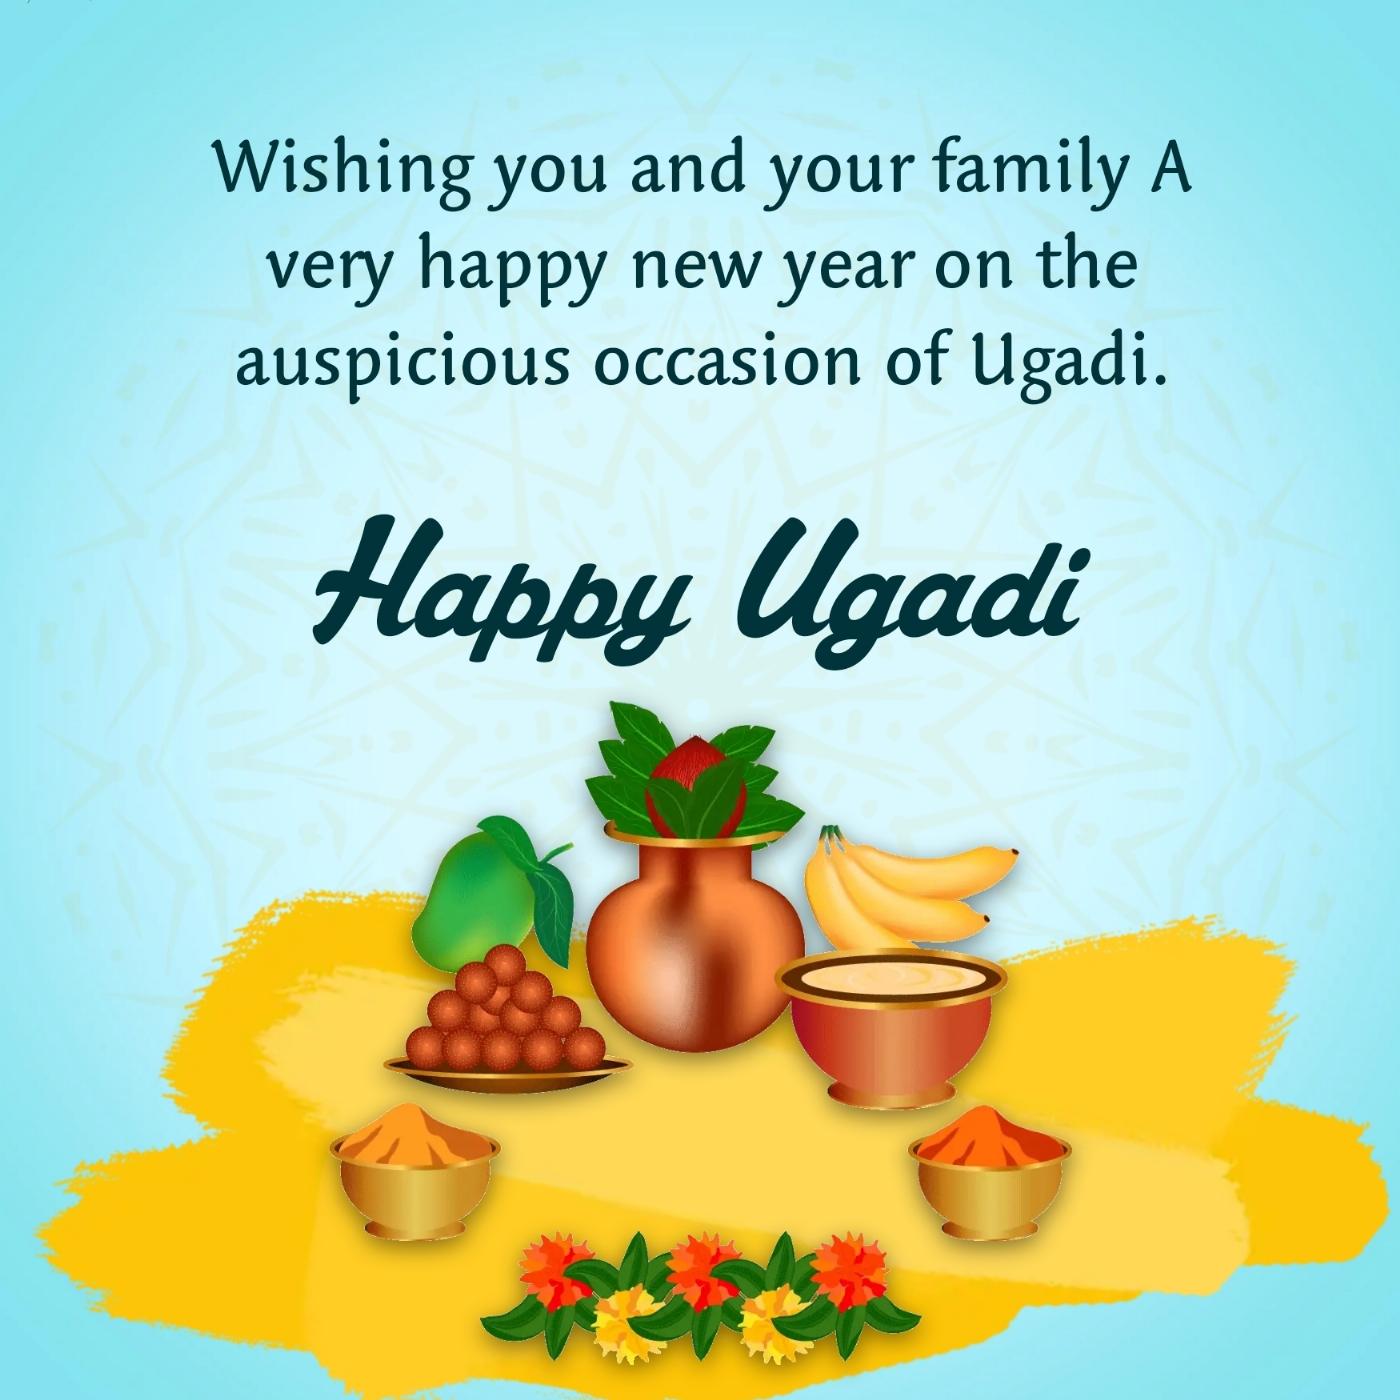 Wishing you and your family A very happy new year